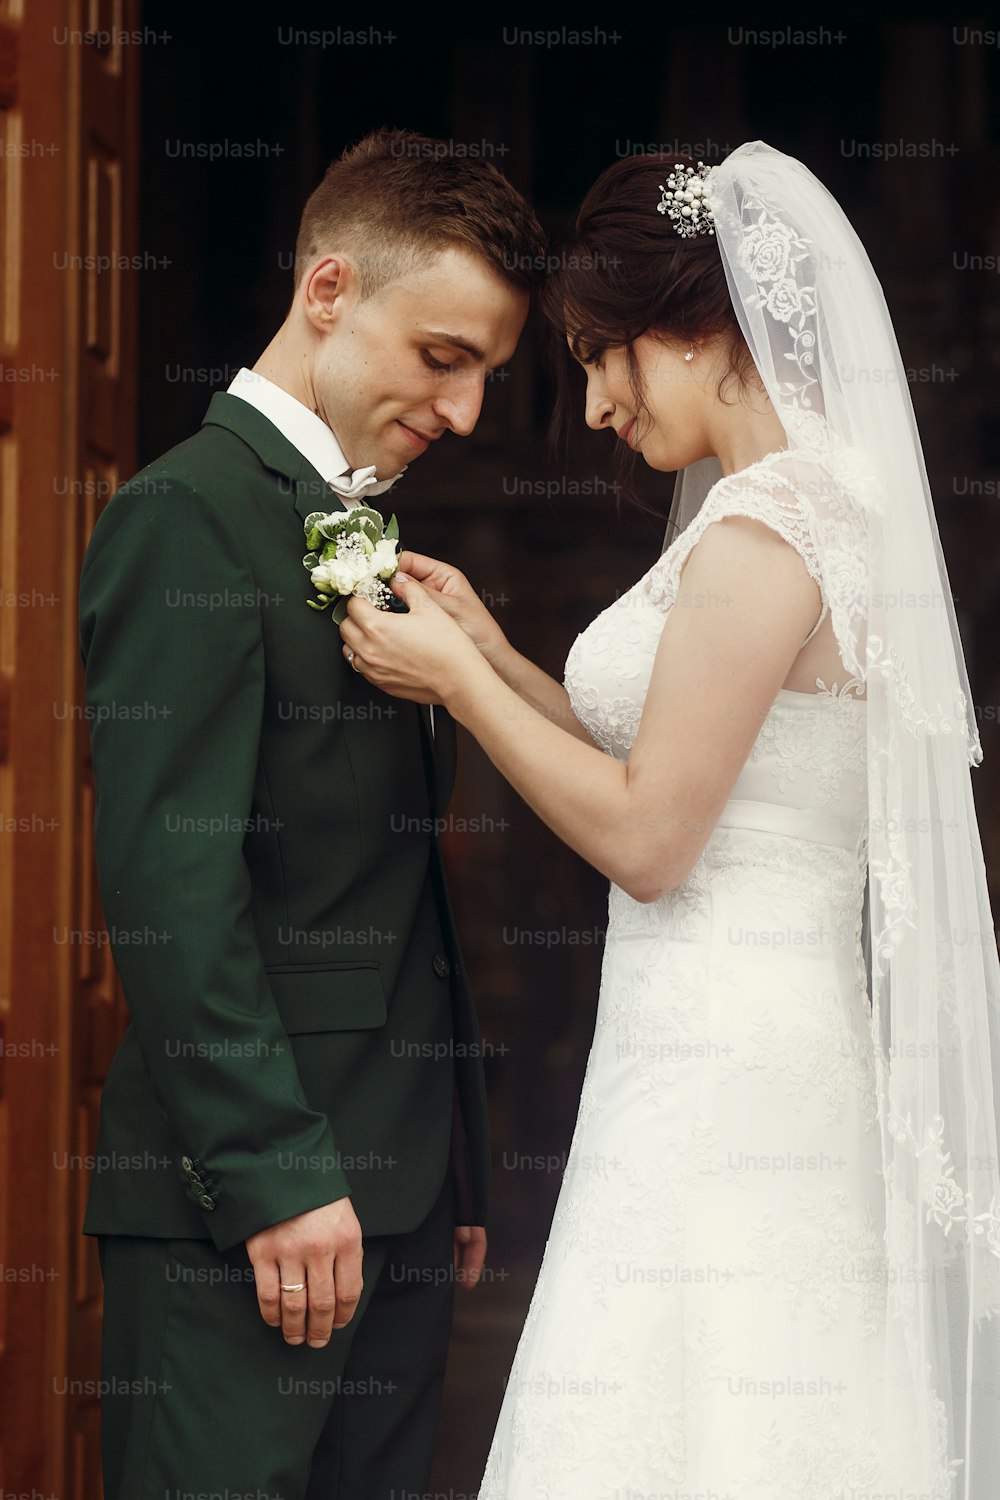 Happy couple of newlyweds, brunette bride in white wedding dress putting on boutonniere on handsome smiling groom, husband and wife at church doorway after ceremony